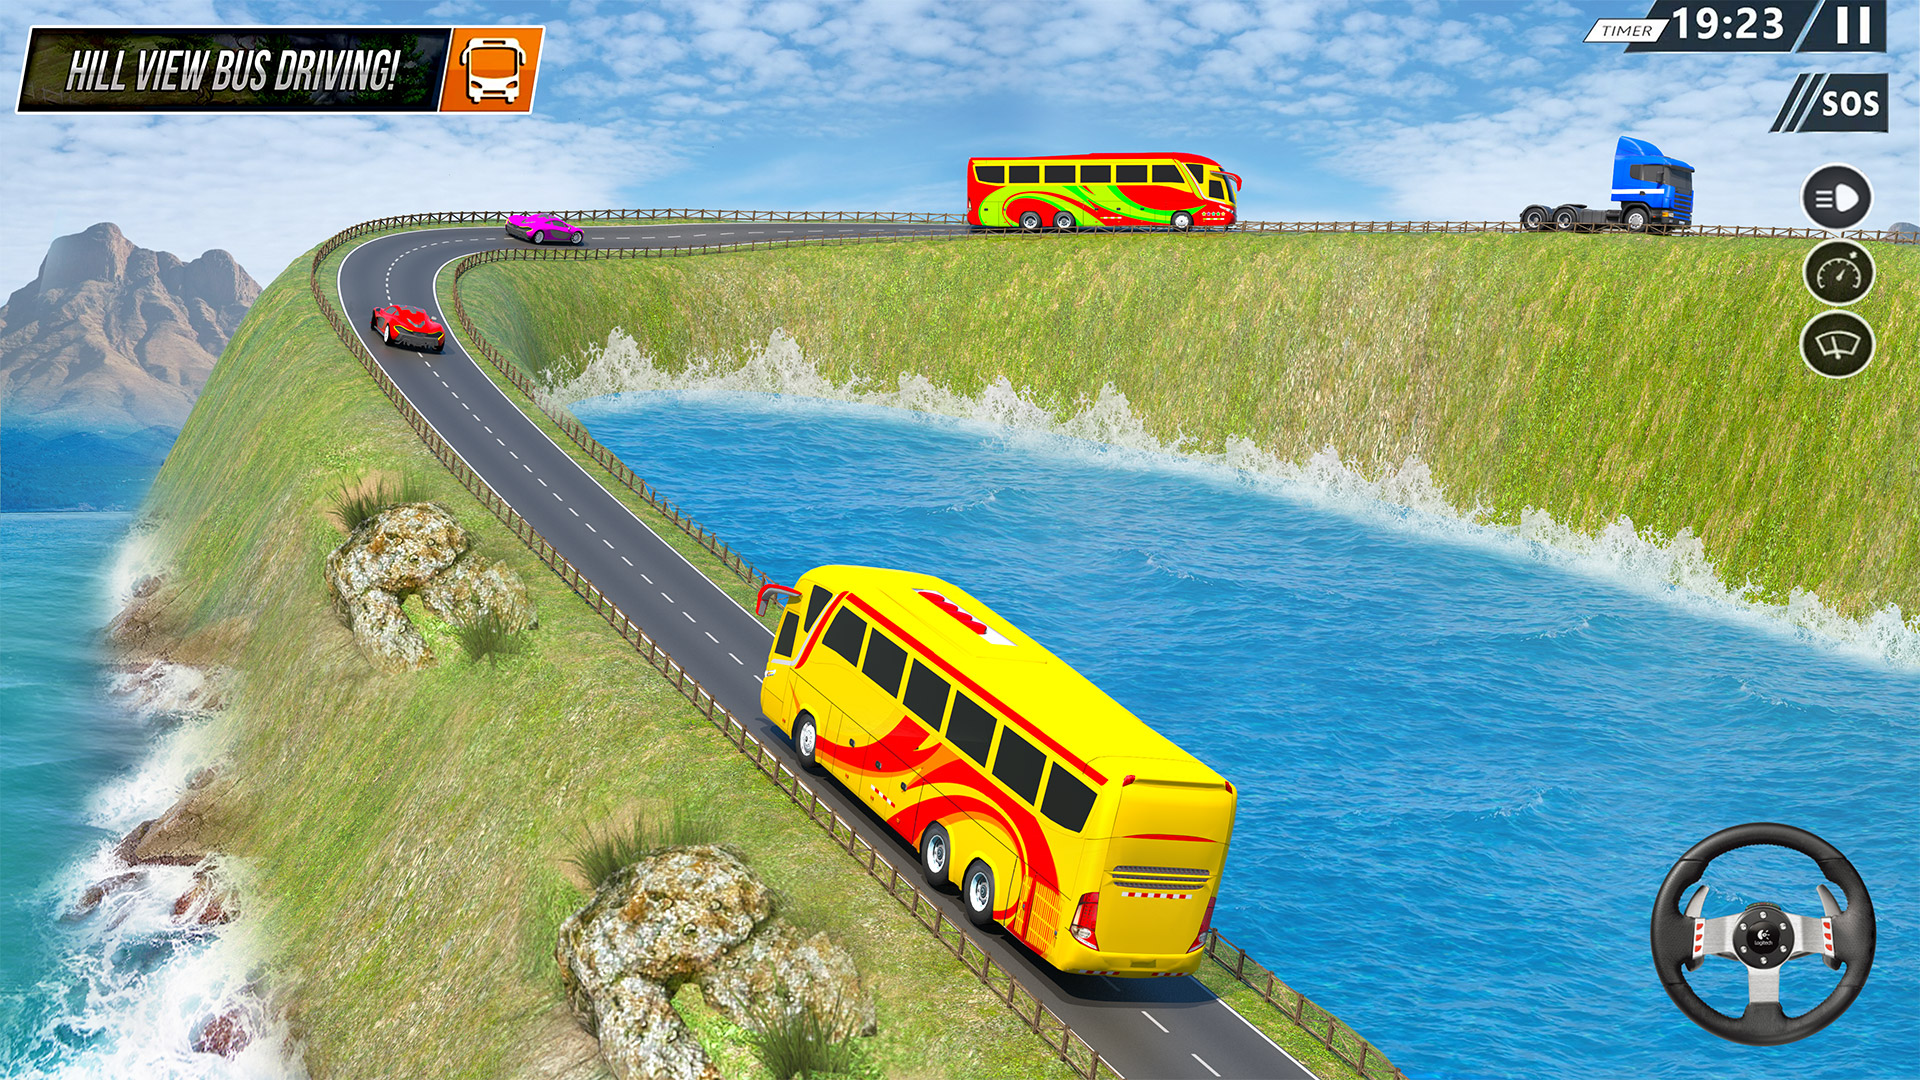 3D Bus Games: Bus Simulator APK  for Android – Download 3D Bus Games:  Bus Simulator XAPK (APK Bundle) Latest Version from 